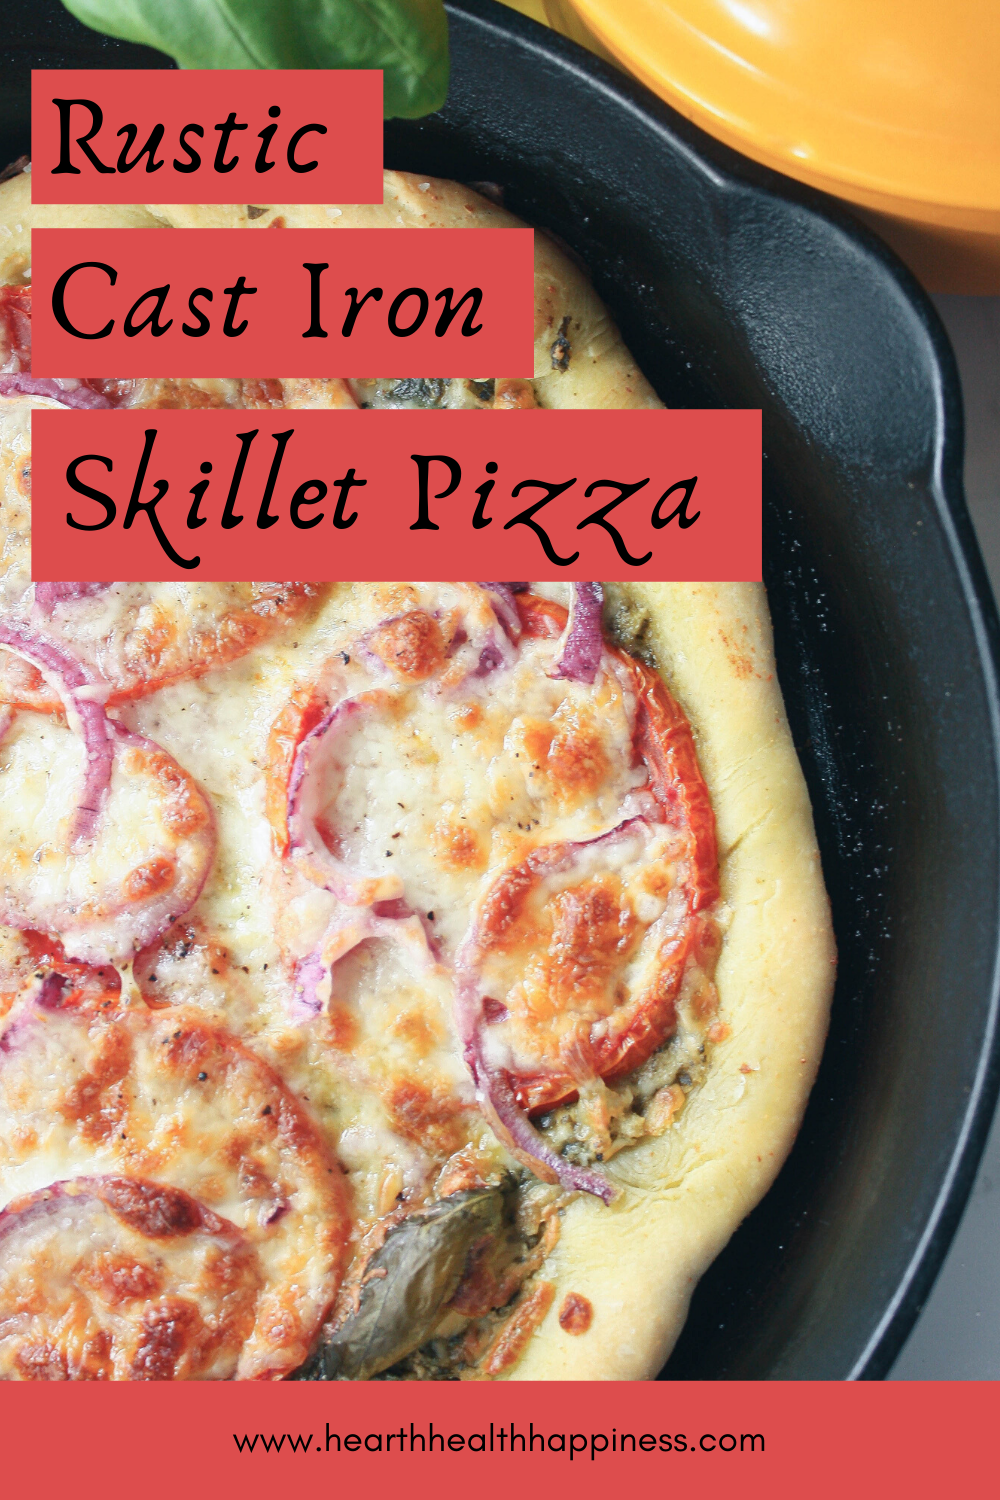 Pinterest Pin of pizza baked in cast iron skillet | hearth health happiness